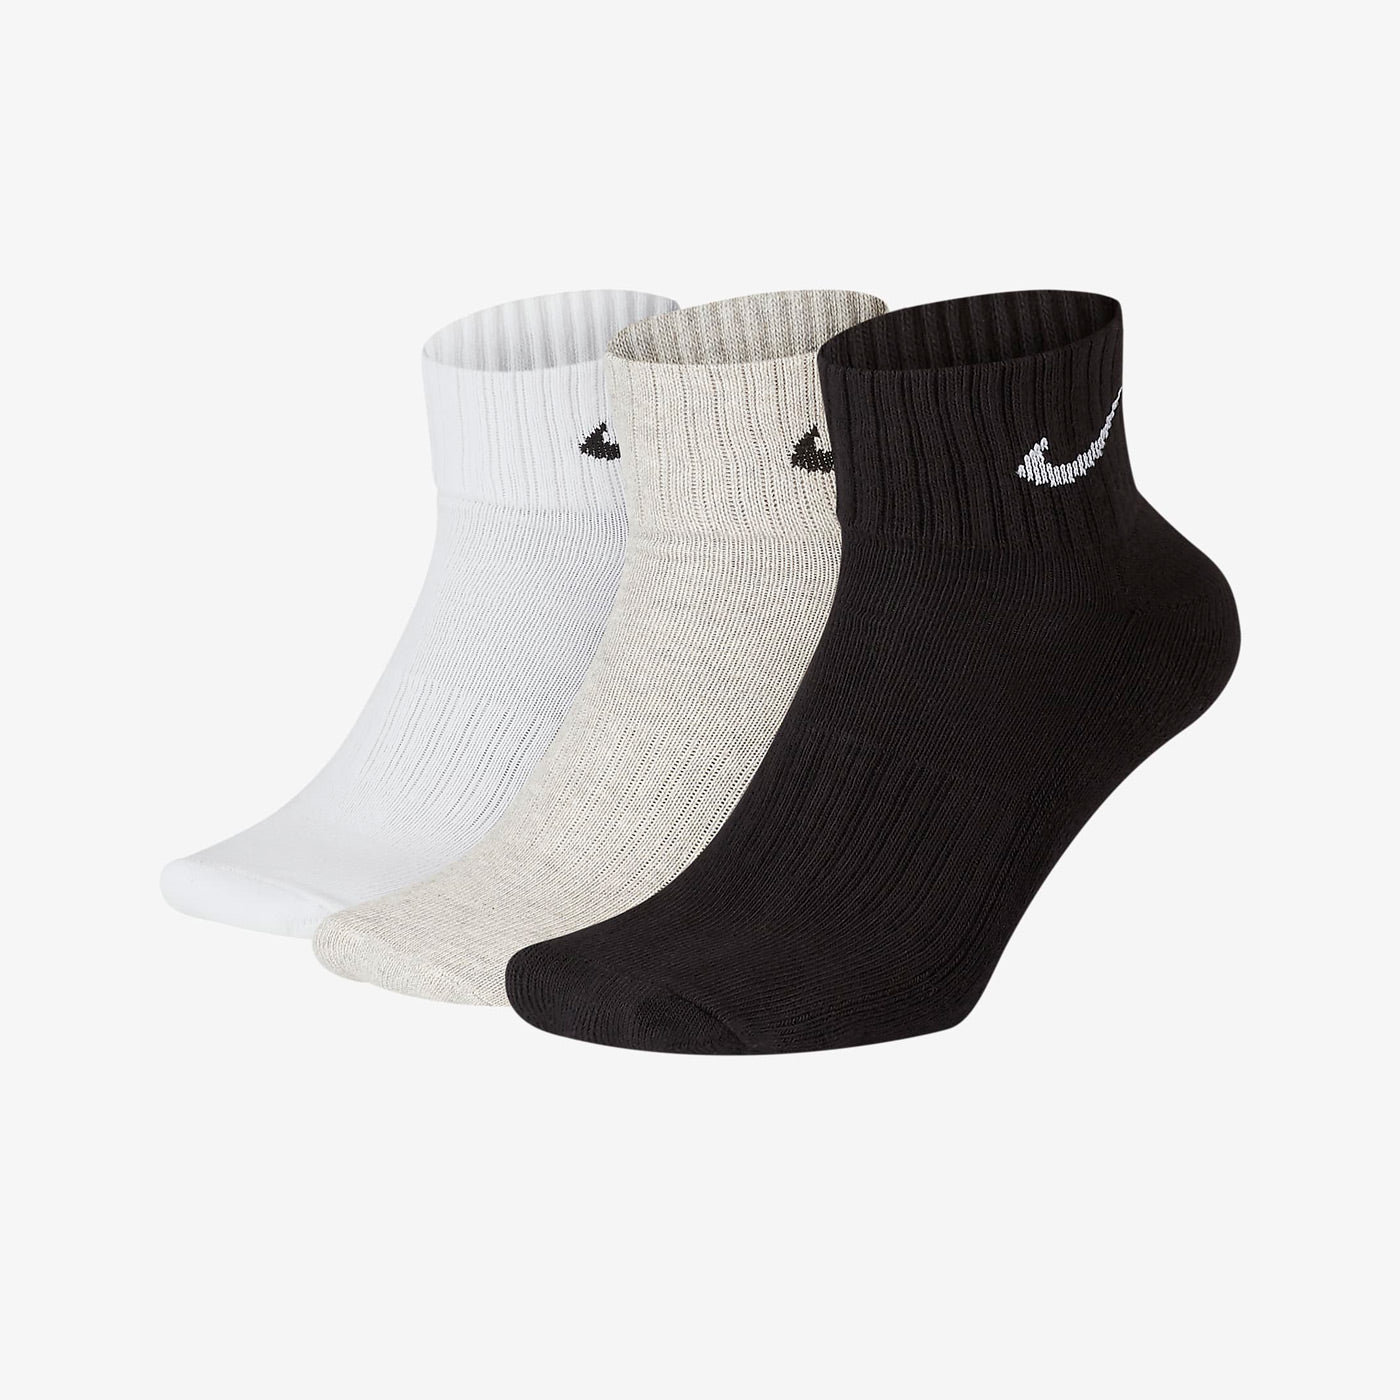 Nike Socks Cushioned Multicolor Pack 3 Brands Democracy